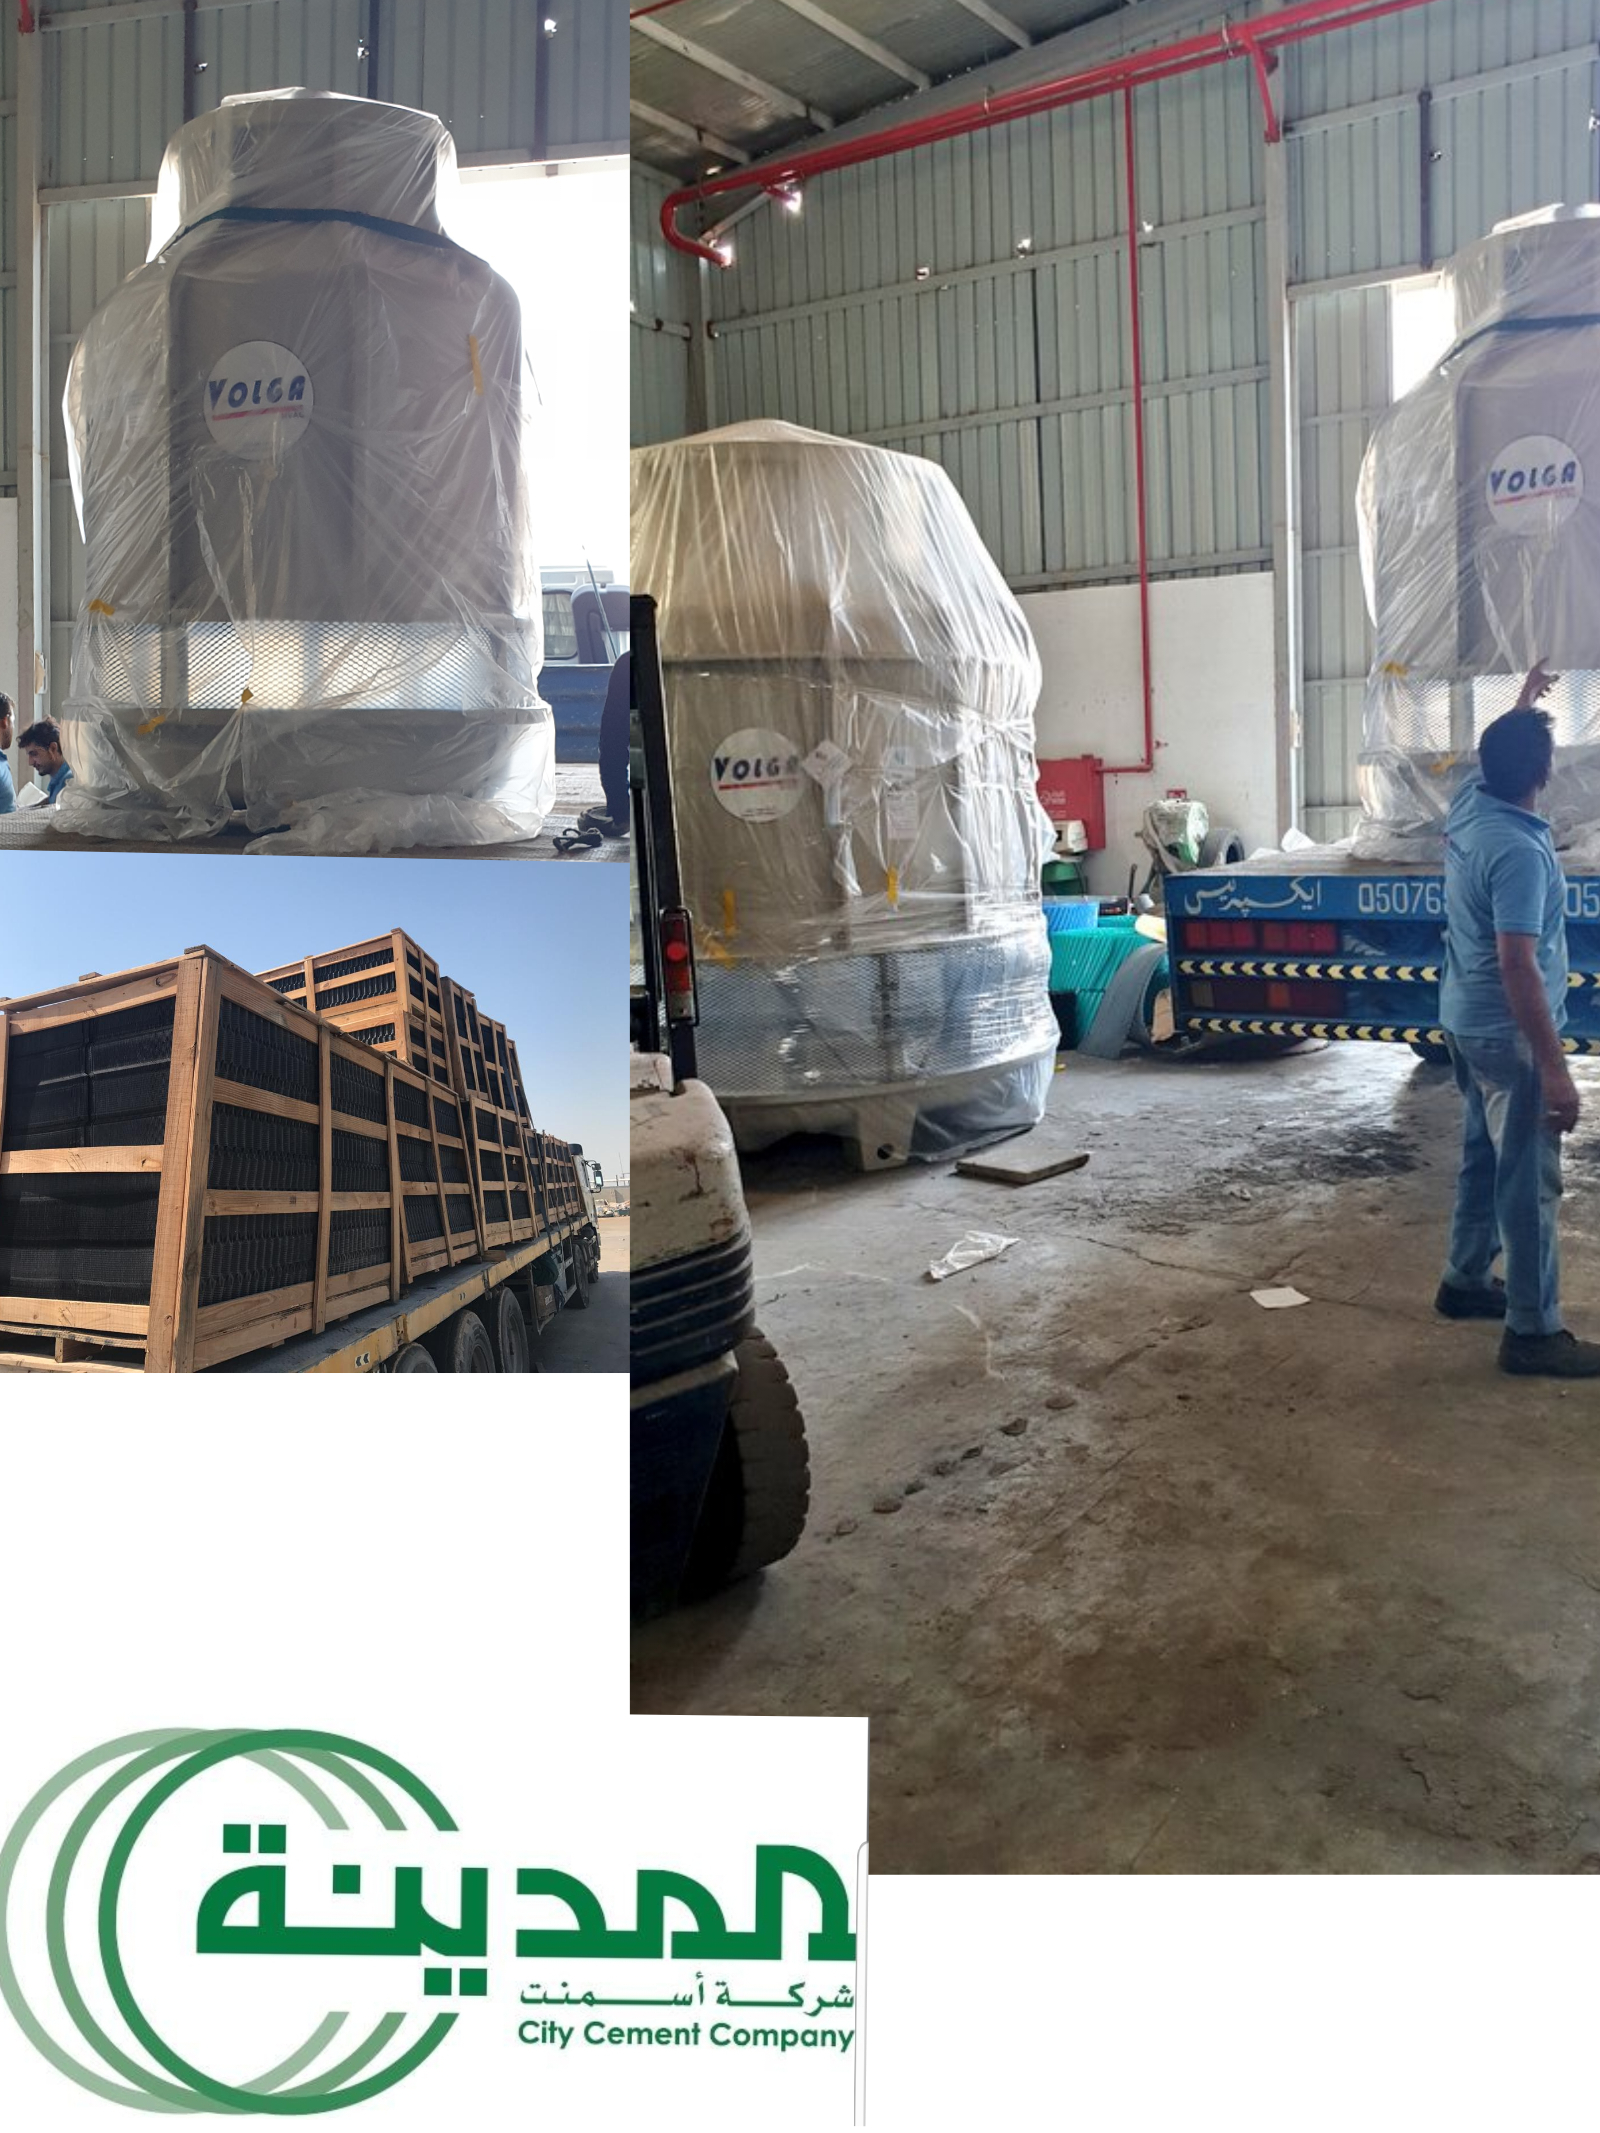 Supply Cooling Tower to Madina Cement Factory 